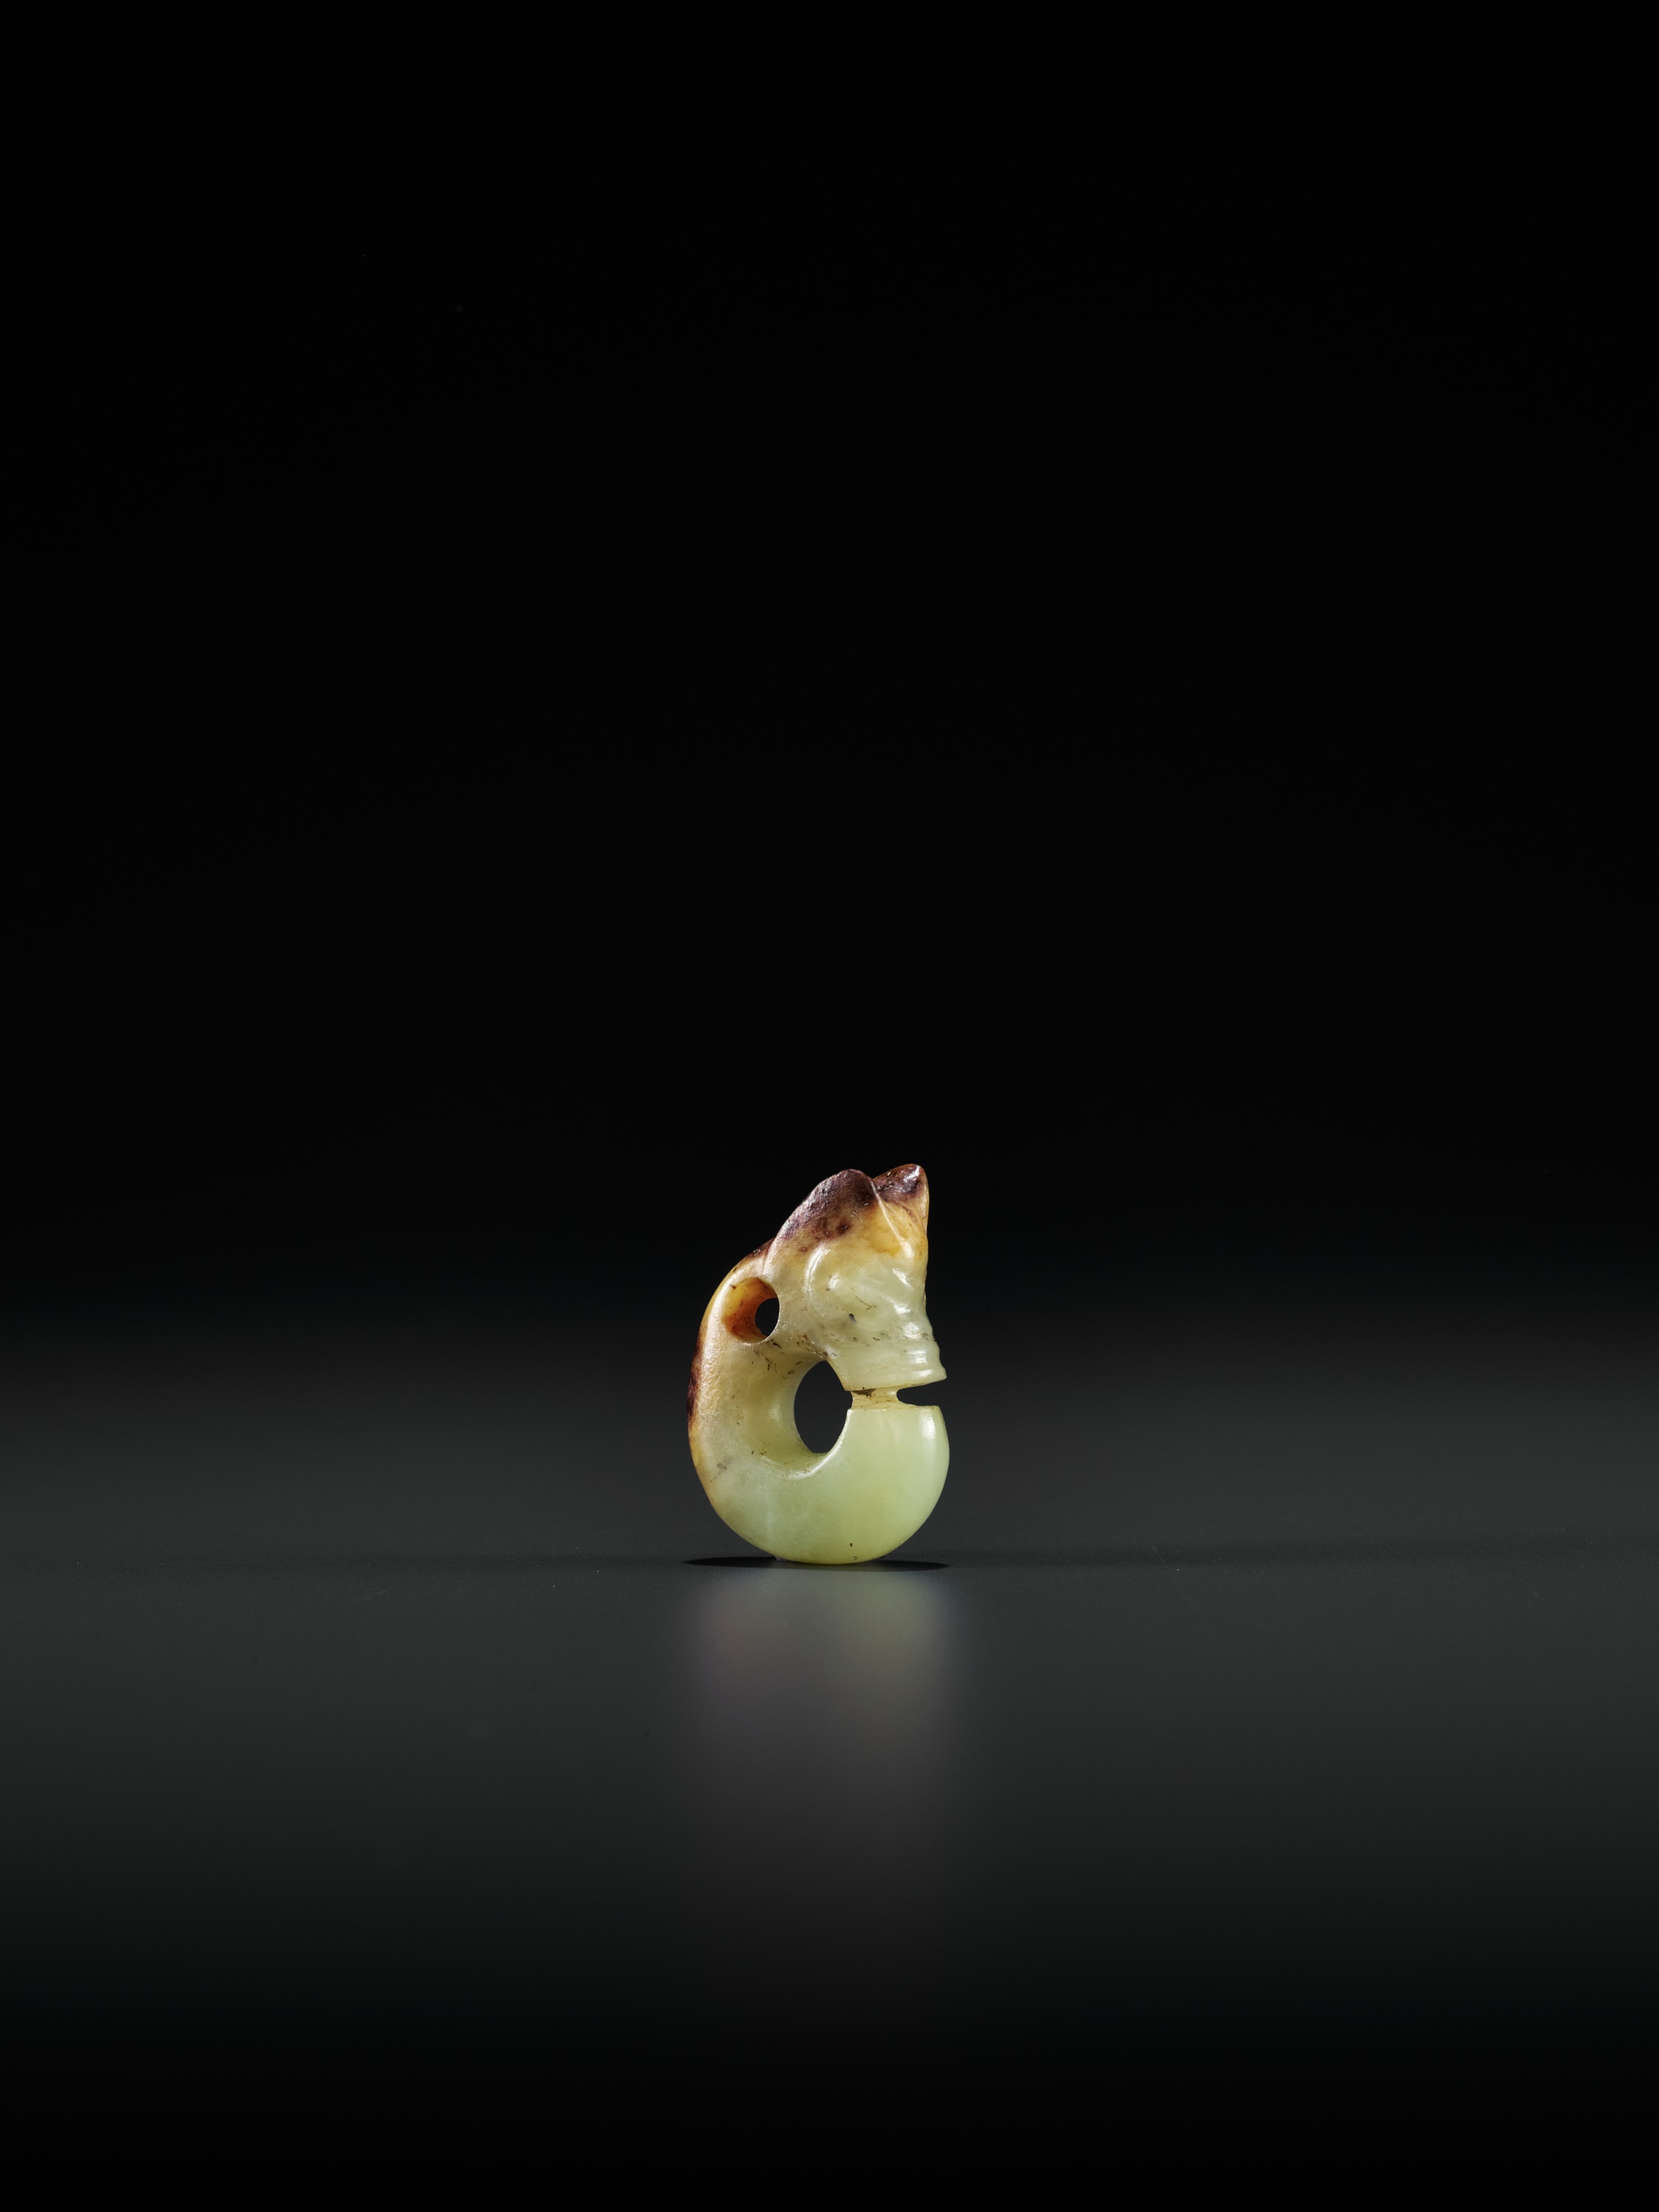 A YELLOW AND RUSSET MINIATURE 'PIG DRAGON' PENDANT, ZHULONG, MING DYNASTY - Image 8 of 10